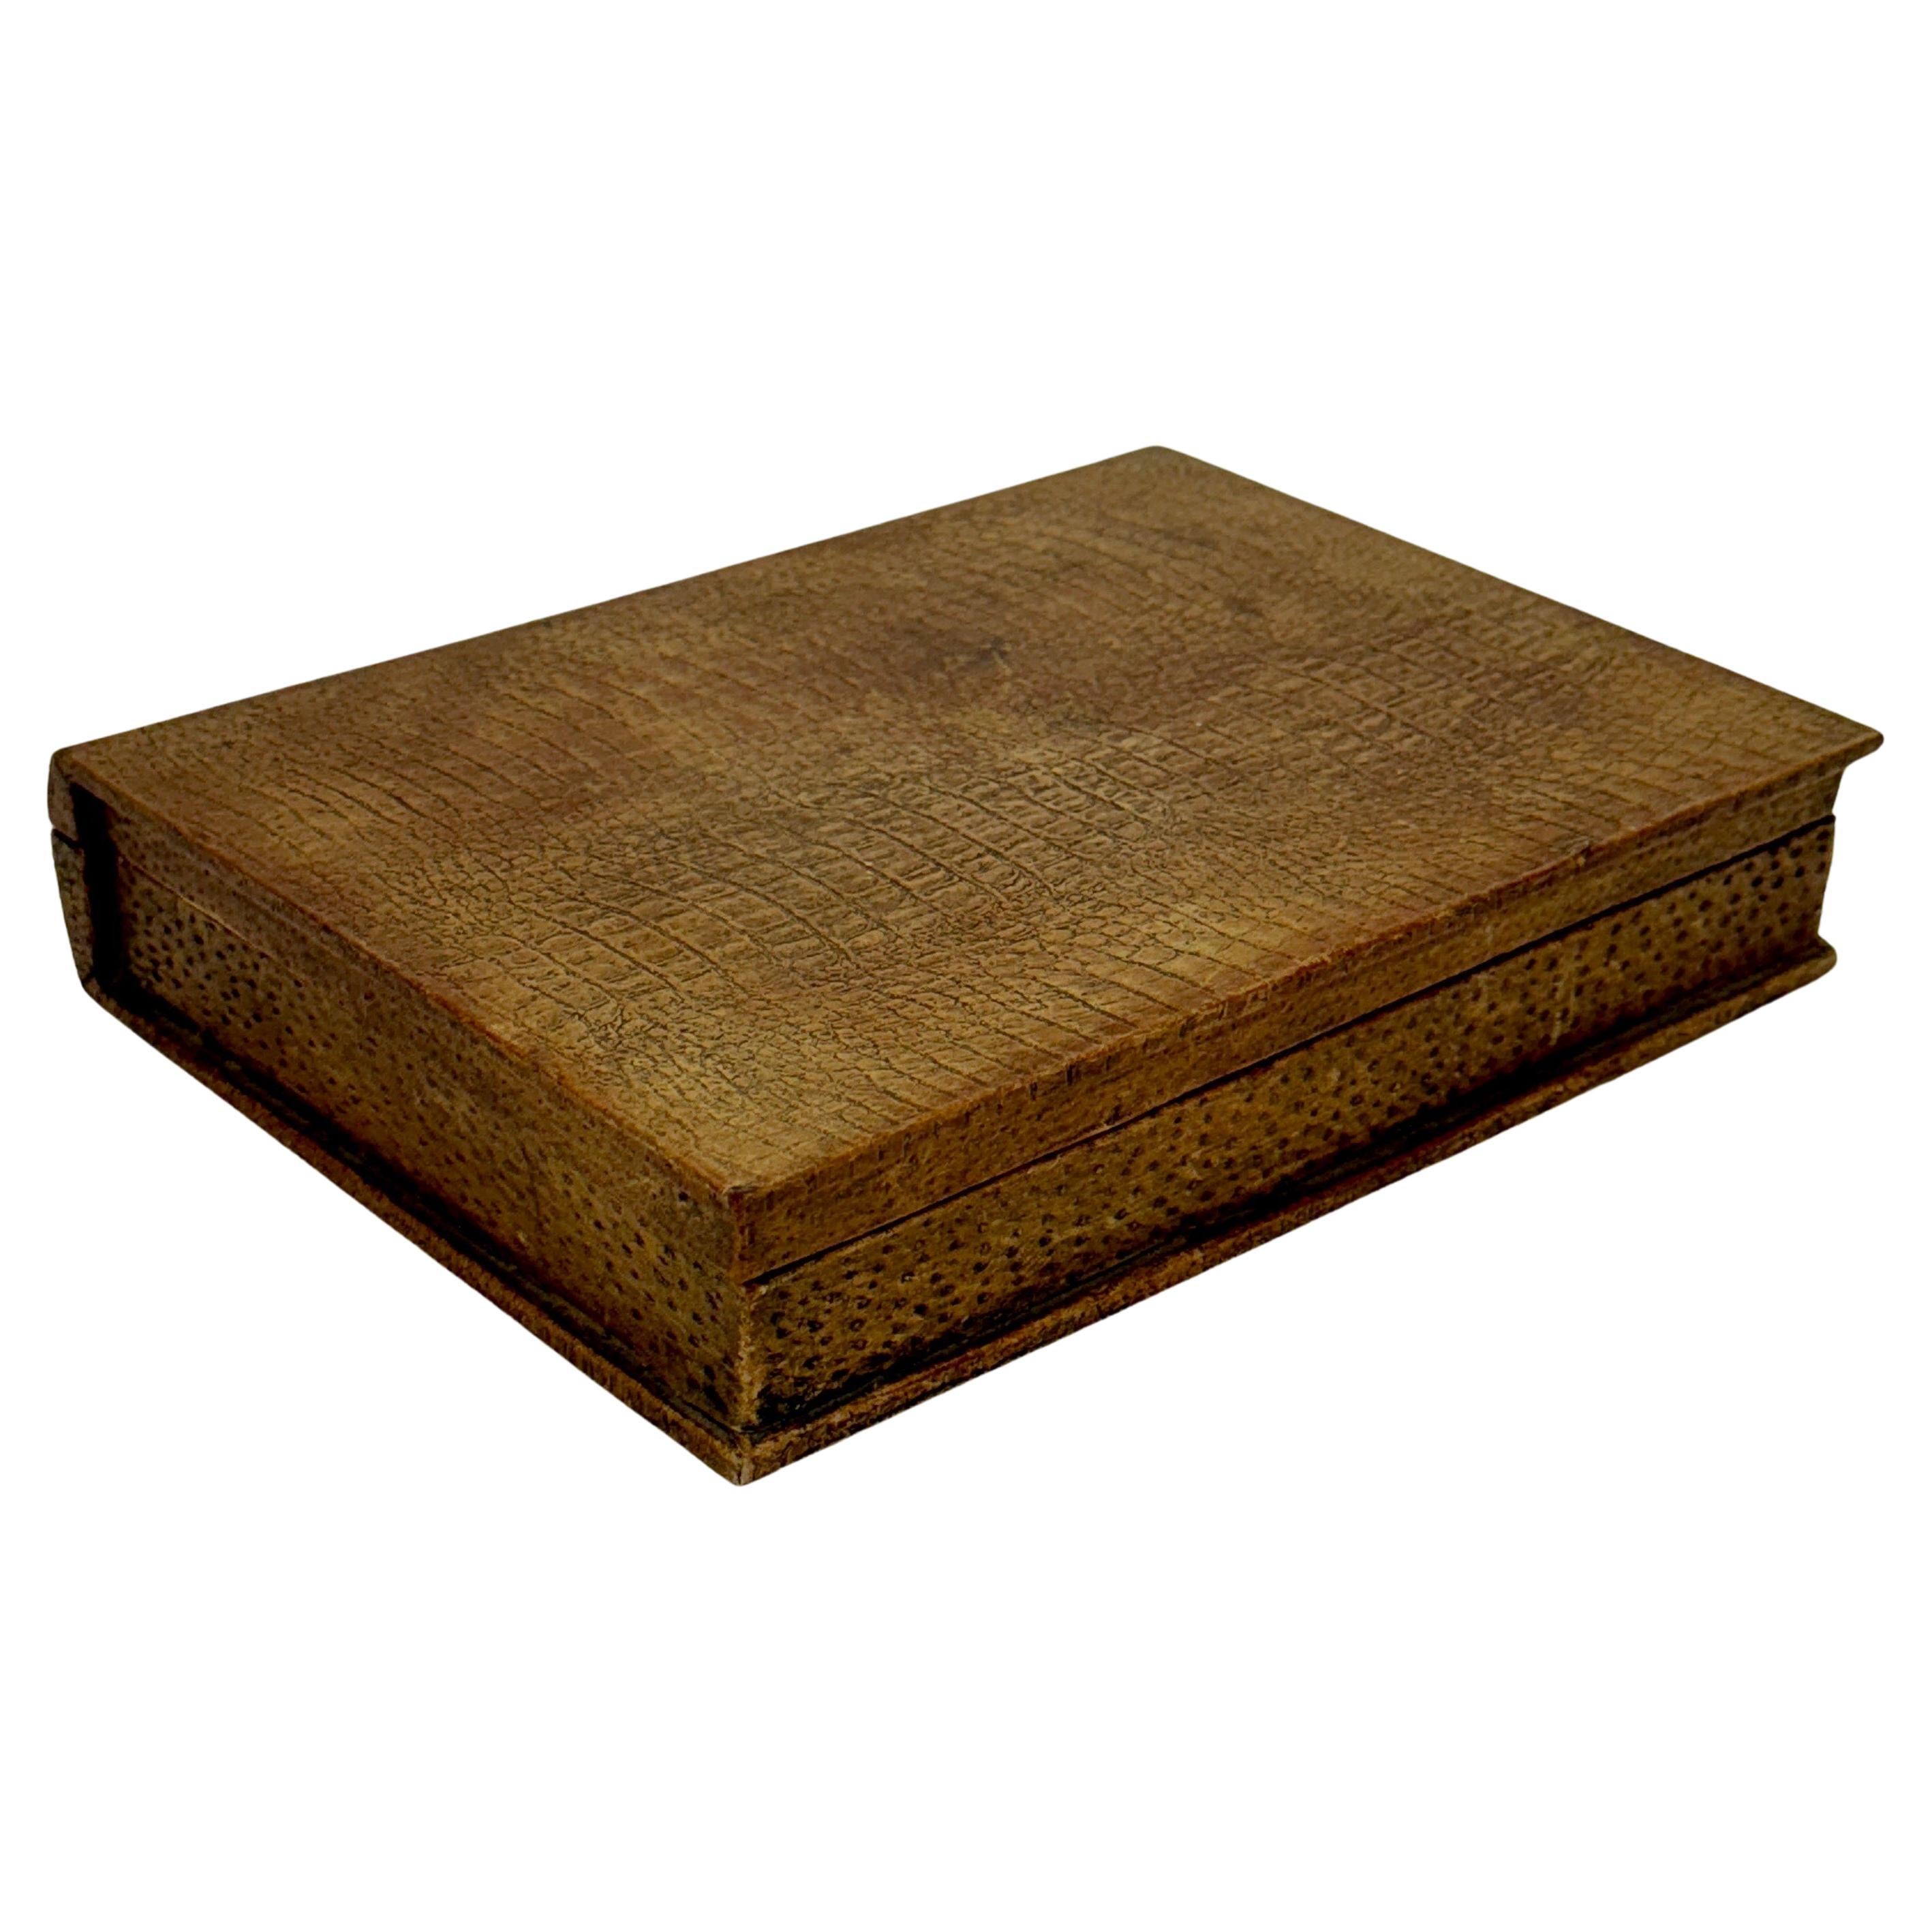 Early French Rectangular Alligator Jewelry Box For Sale